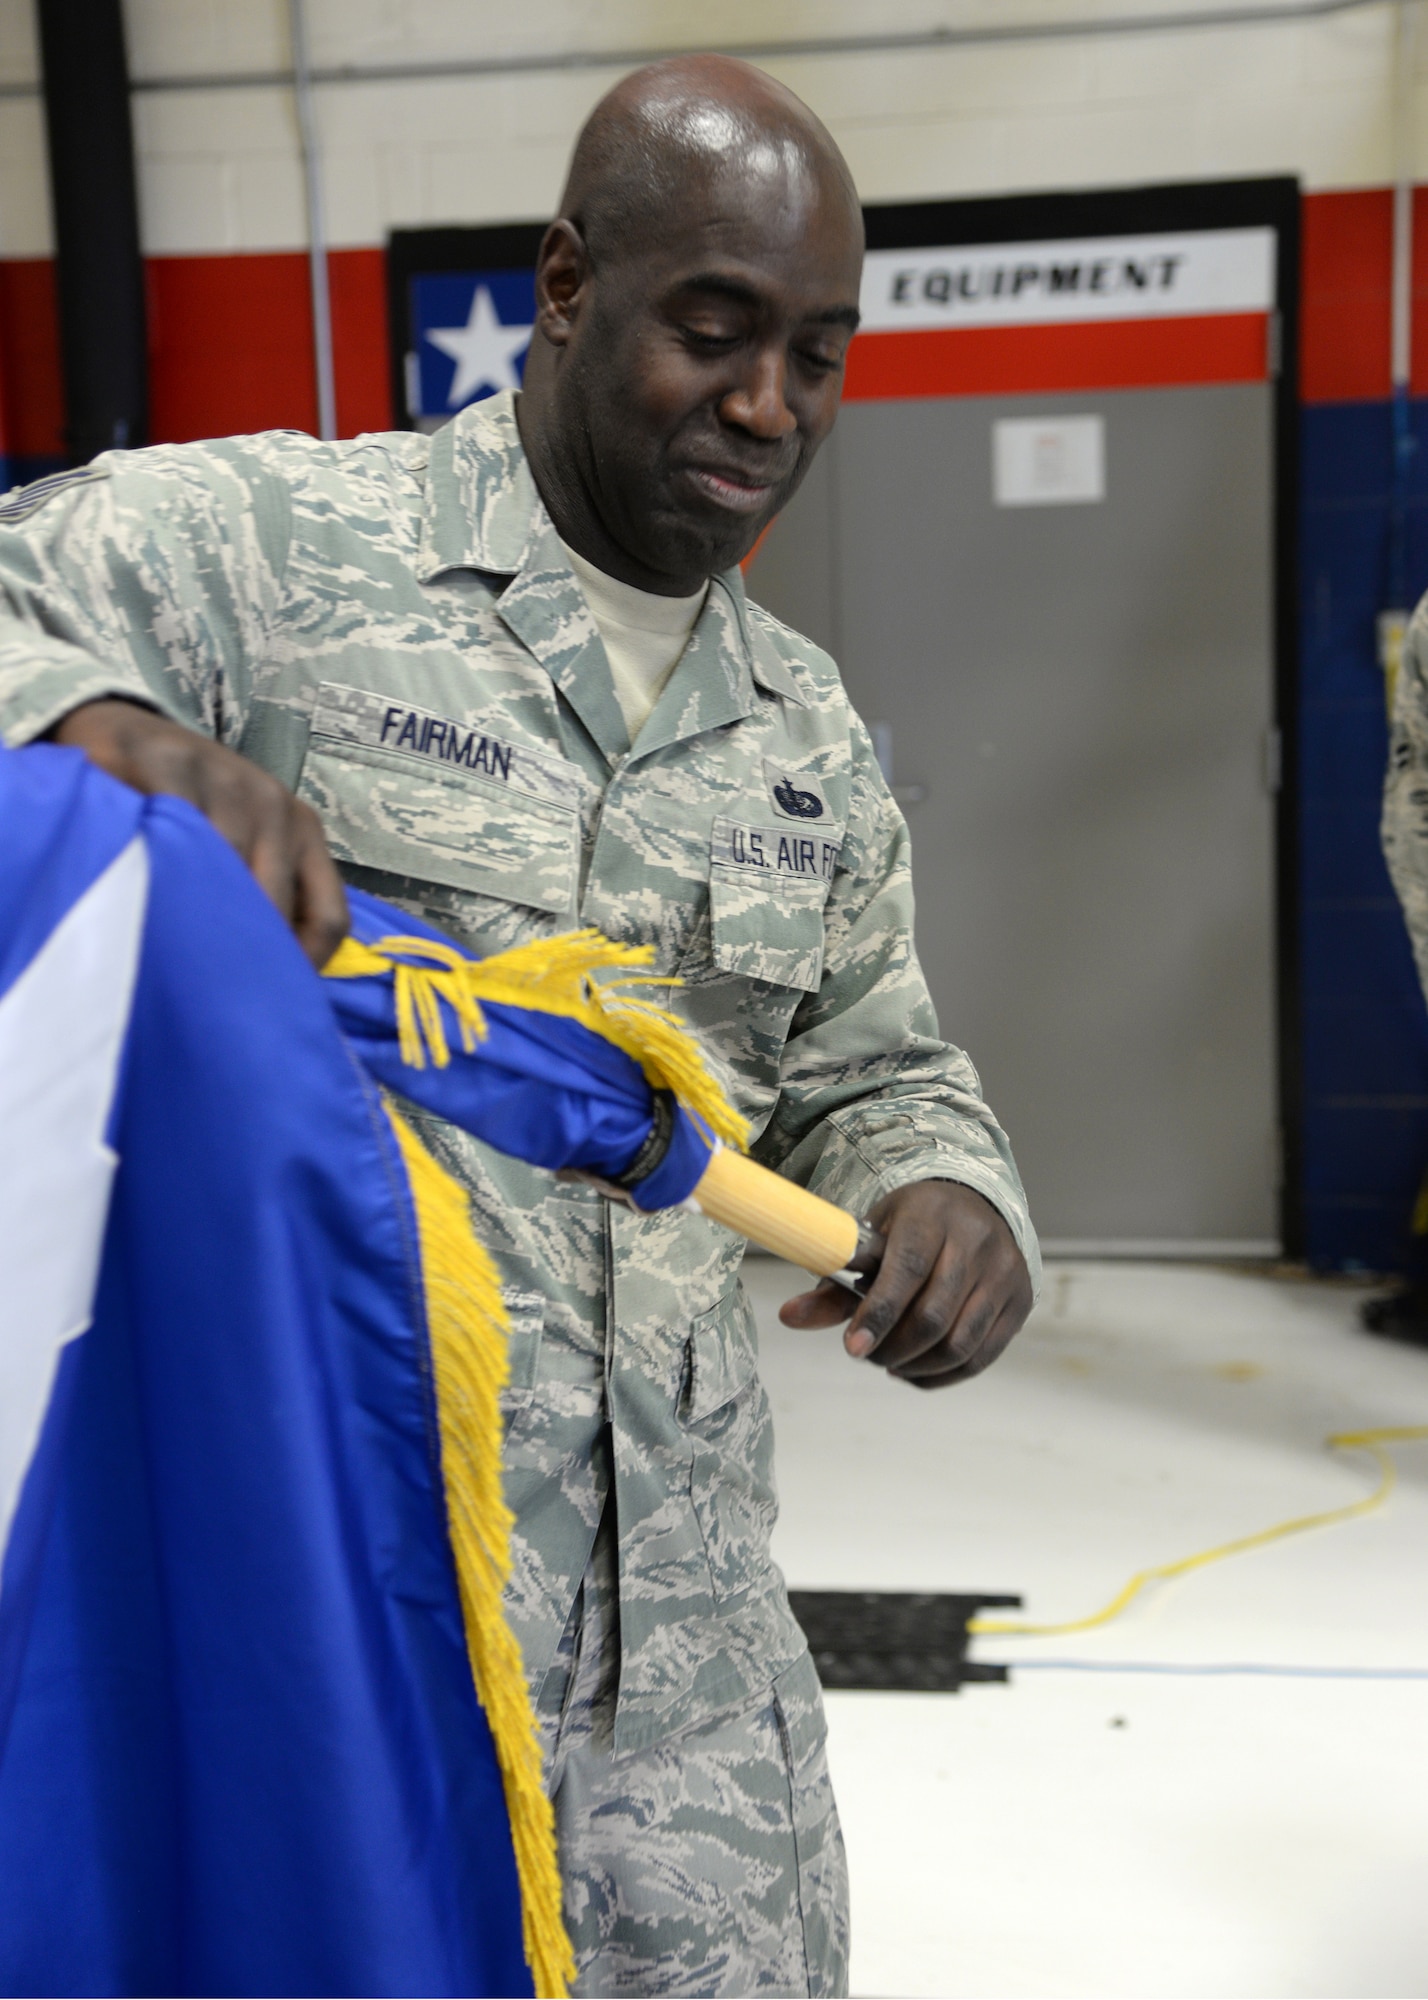 Tech. Sgt. Kevin Fairman, a member of the 149th Fighter Wing, puts away a two-star command flag after an all call held Dec 10 in a maintenance hangar at Joint Base San Antonio-Lackland, Texas. 